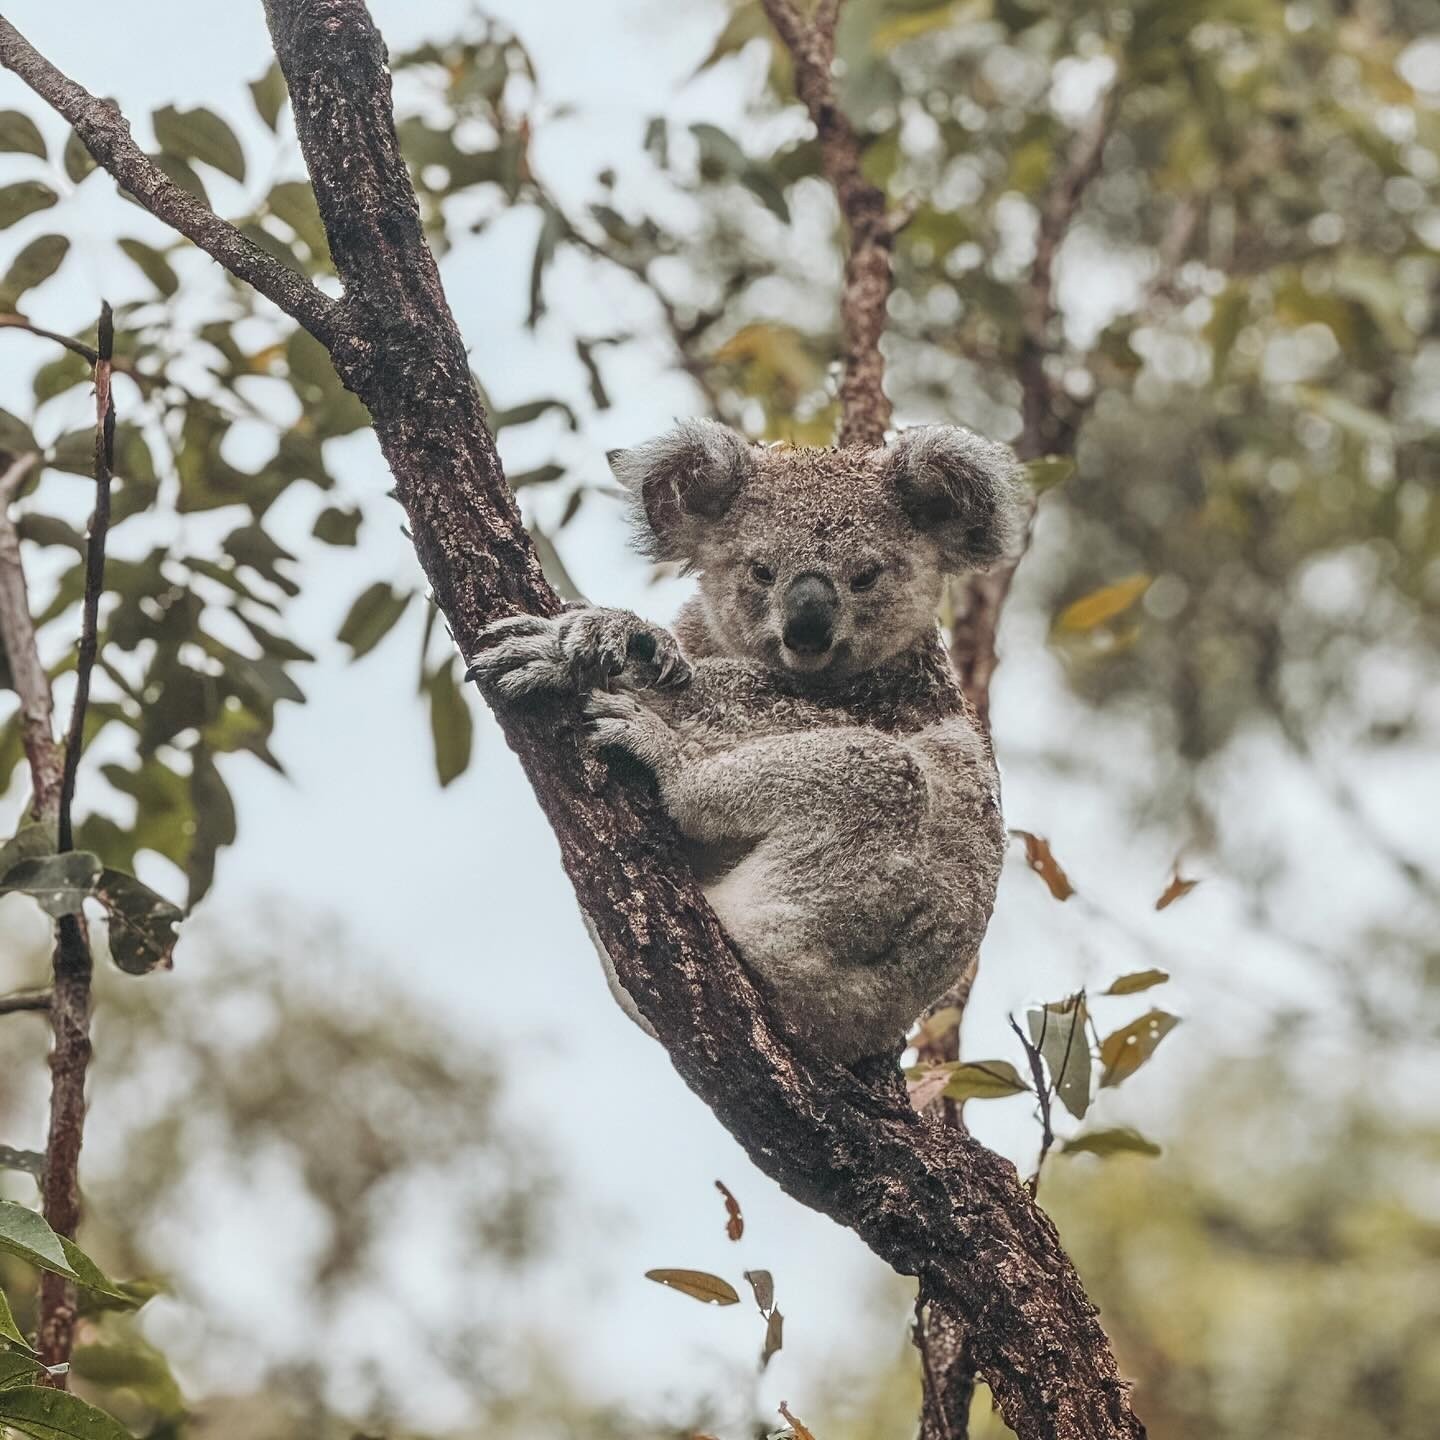 Spotting a koala in the wild can be a bucket list item on your Maggie trip, and we're sharing the best 3 places to see them! ⁠
⁠
1. The Forts Walk is a must-do in its own right. This trail is renowned for its opportunities to spot wild koalas. Keep a